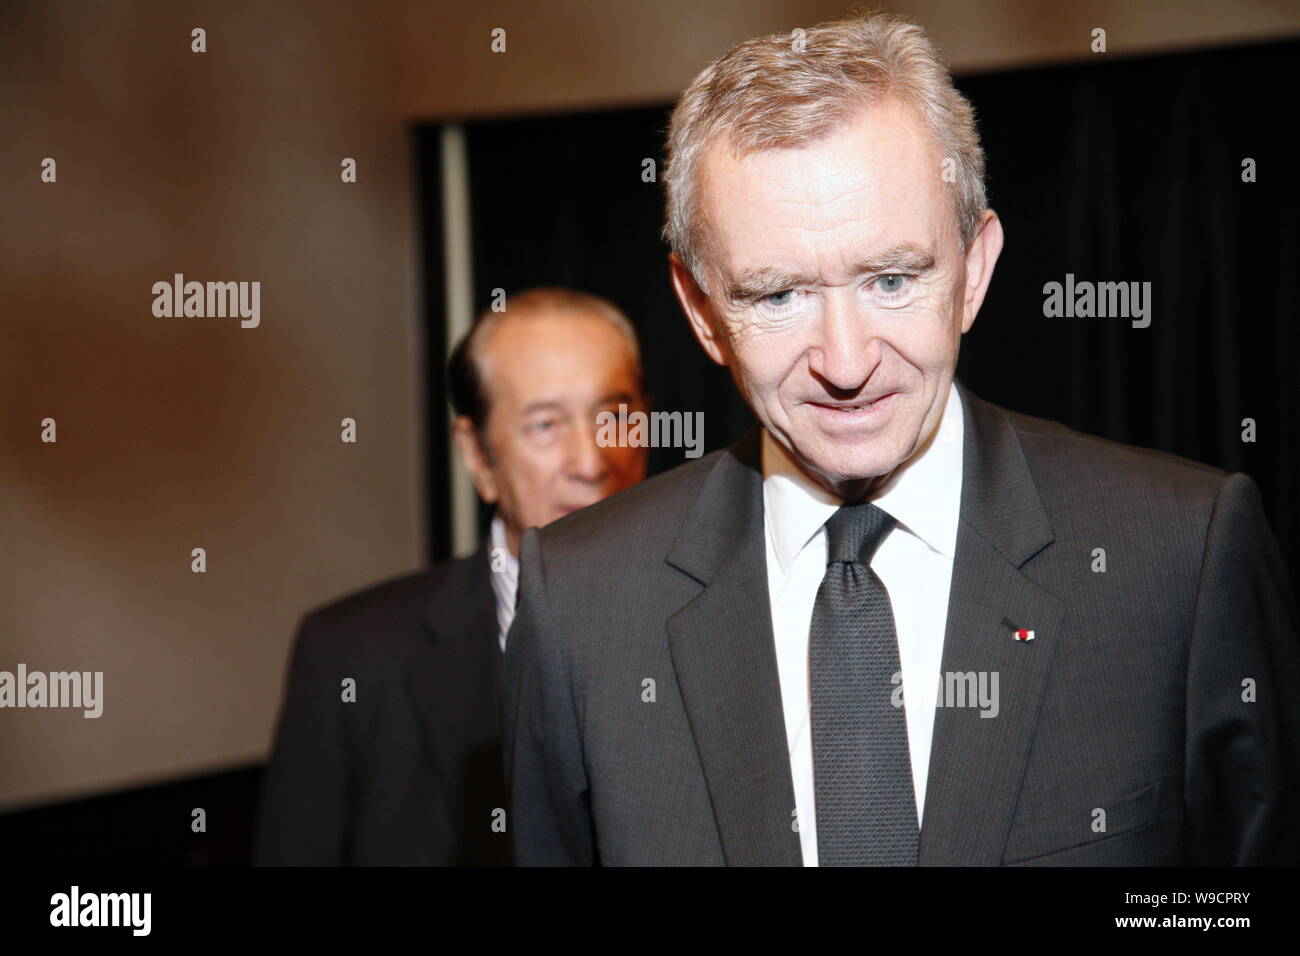 Bernard Arnault (F), CEO of Moet Hennessy Louis Vuitton (MHLV) and Casino  tycoon Stanley Ho are seen at the ground-breaking ceremony for LAvenue  Shang Stock Photo - Alamy